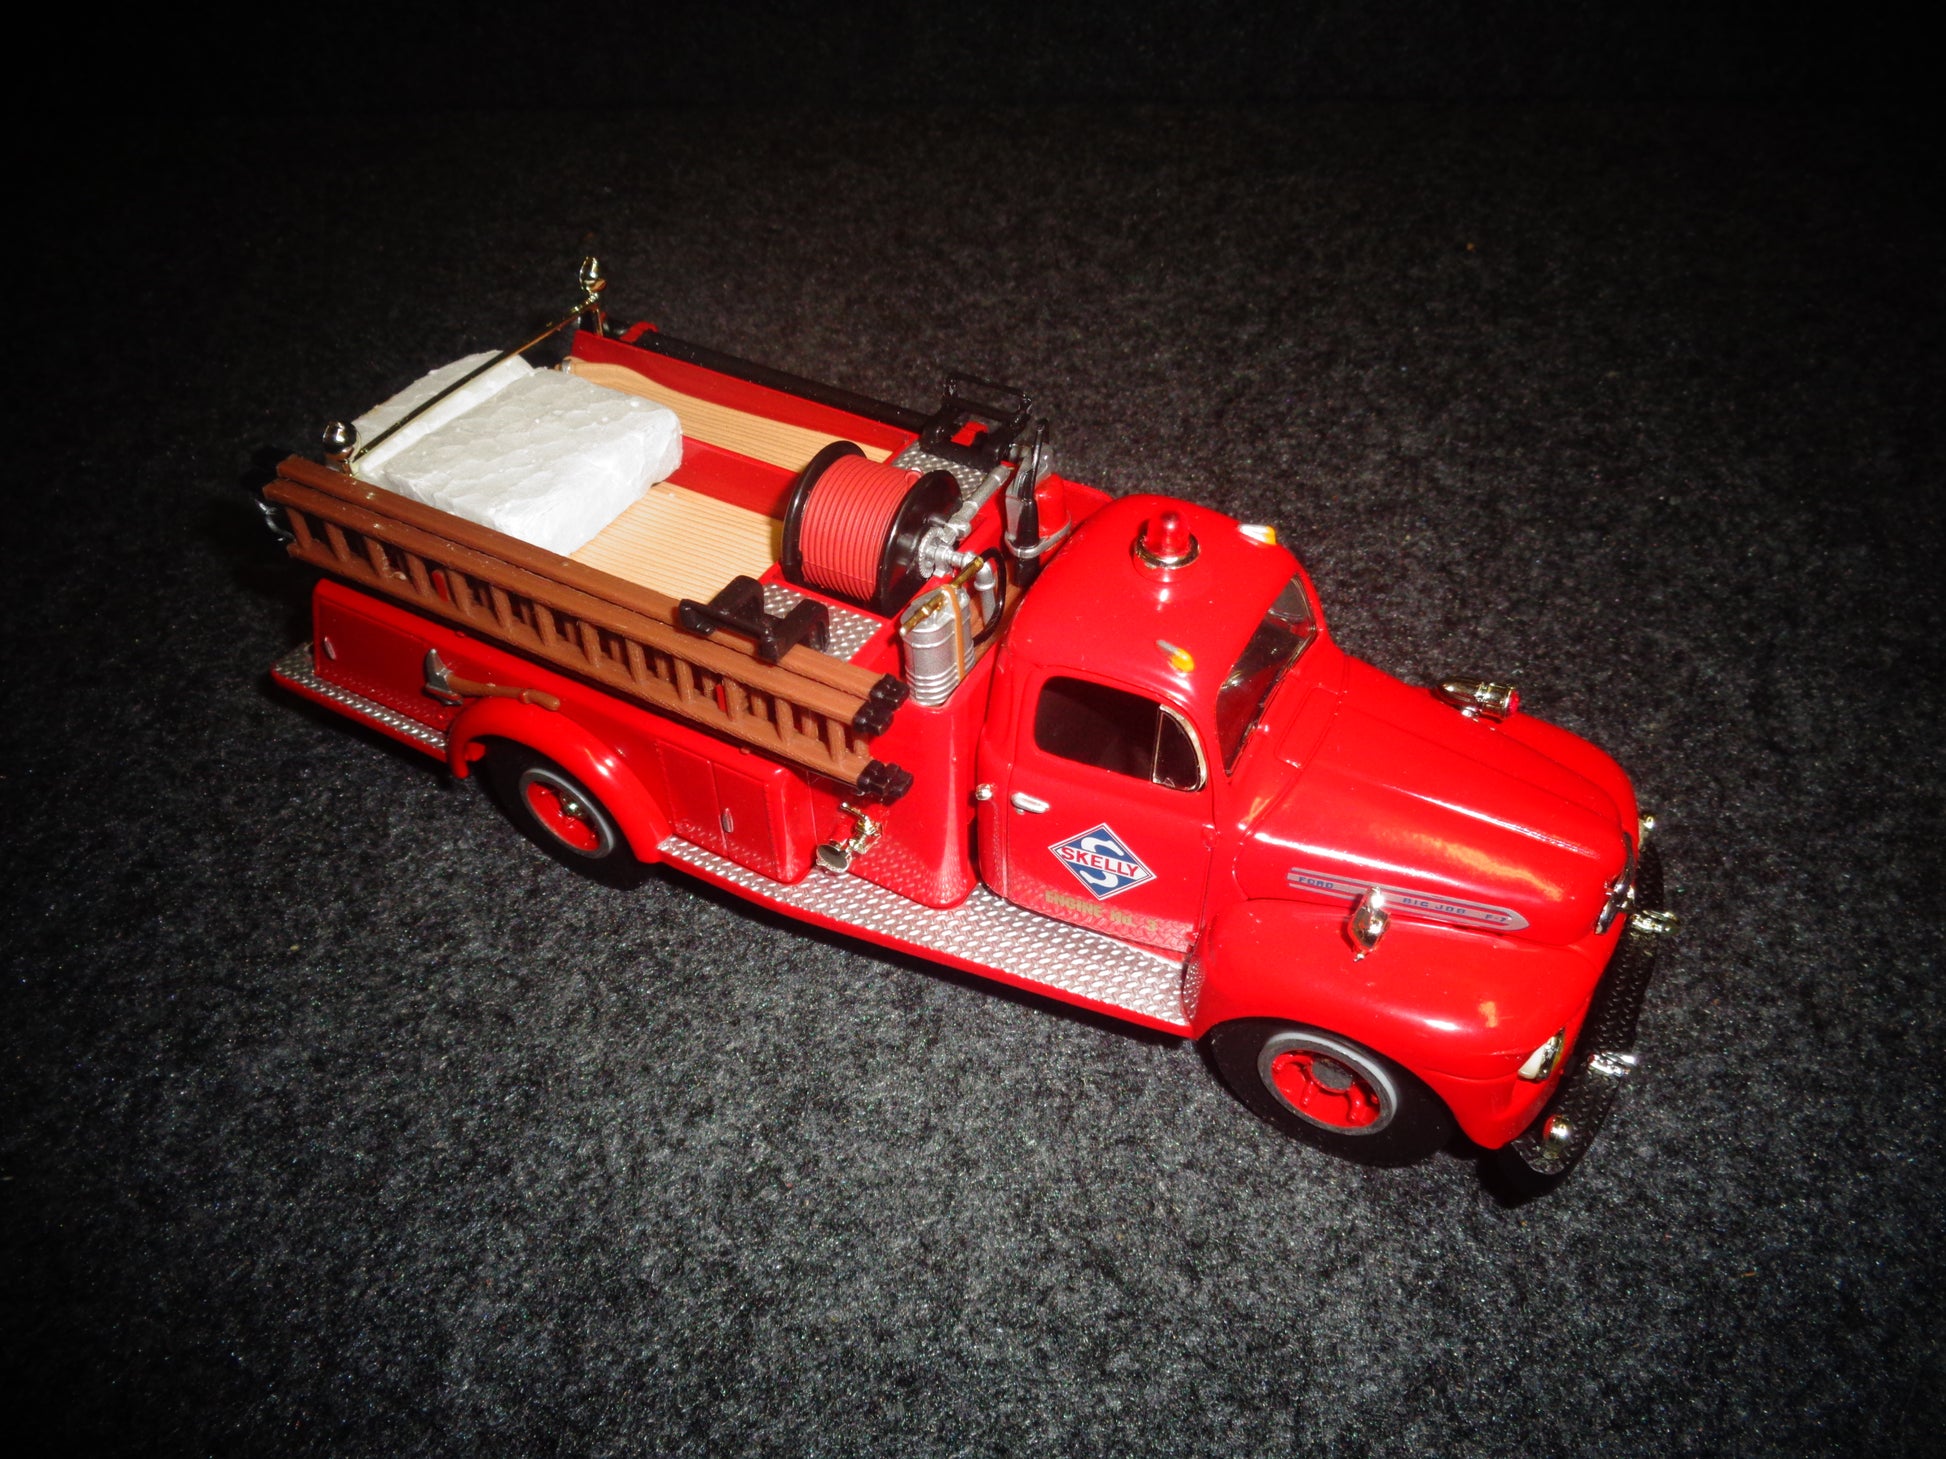 Skelly Oil 1951 Ford F-7 Fire Truck